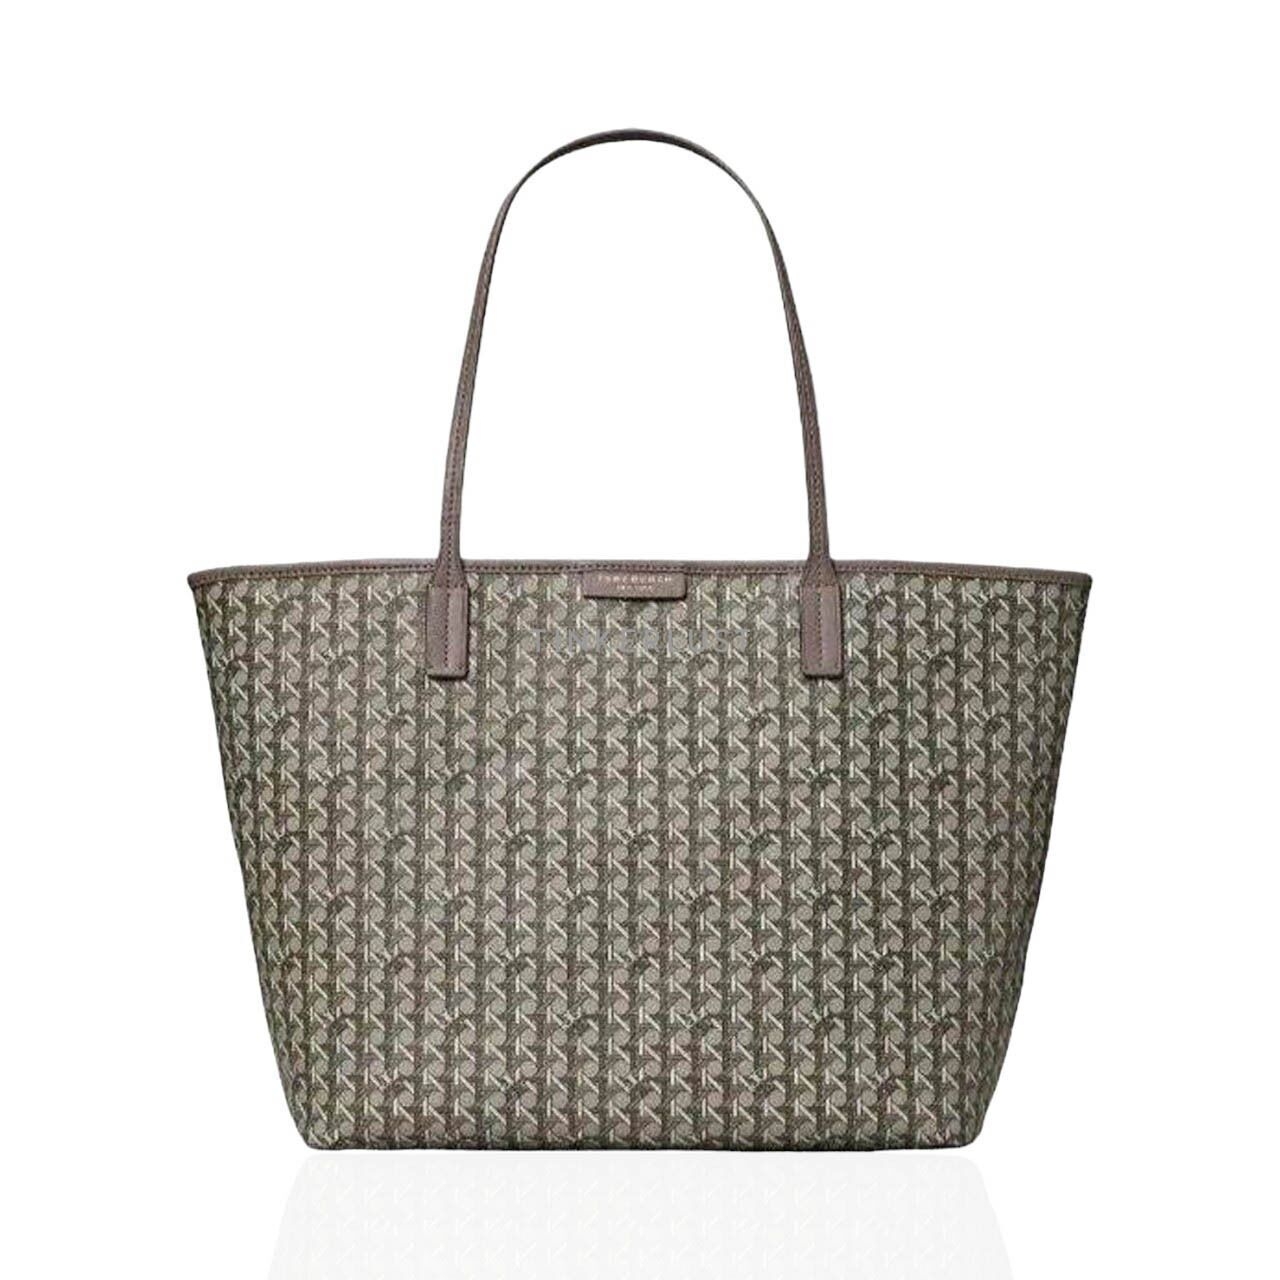 Tory Burch Ever-Ready Zip In Zinc Large Tote Bag 